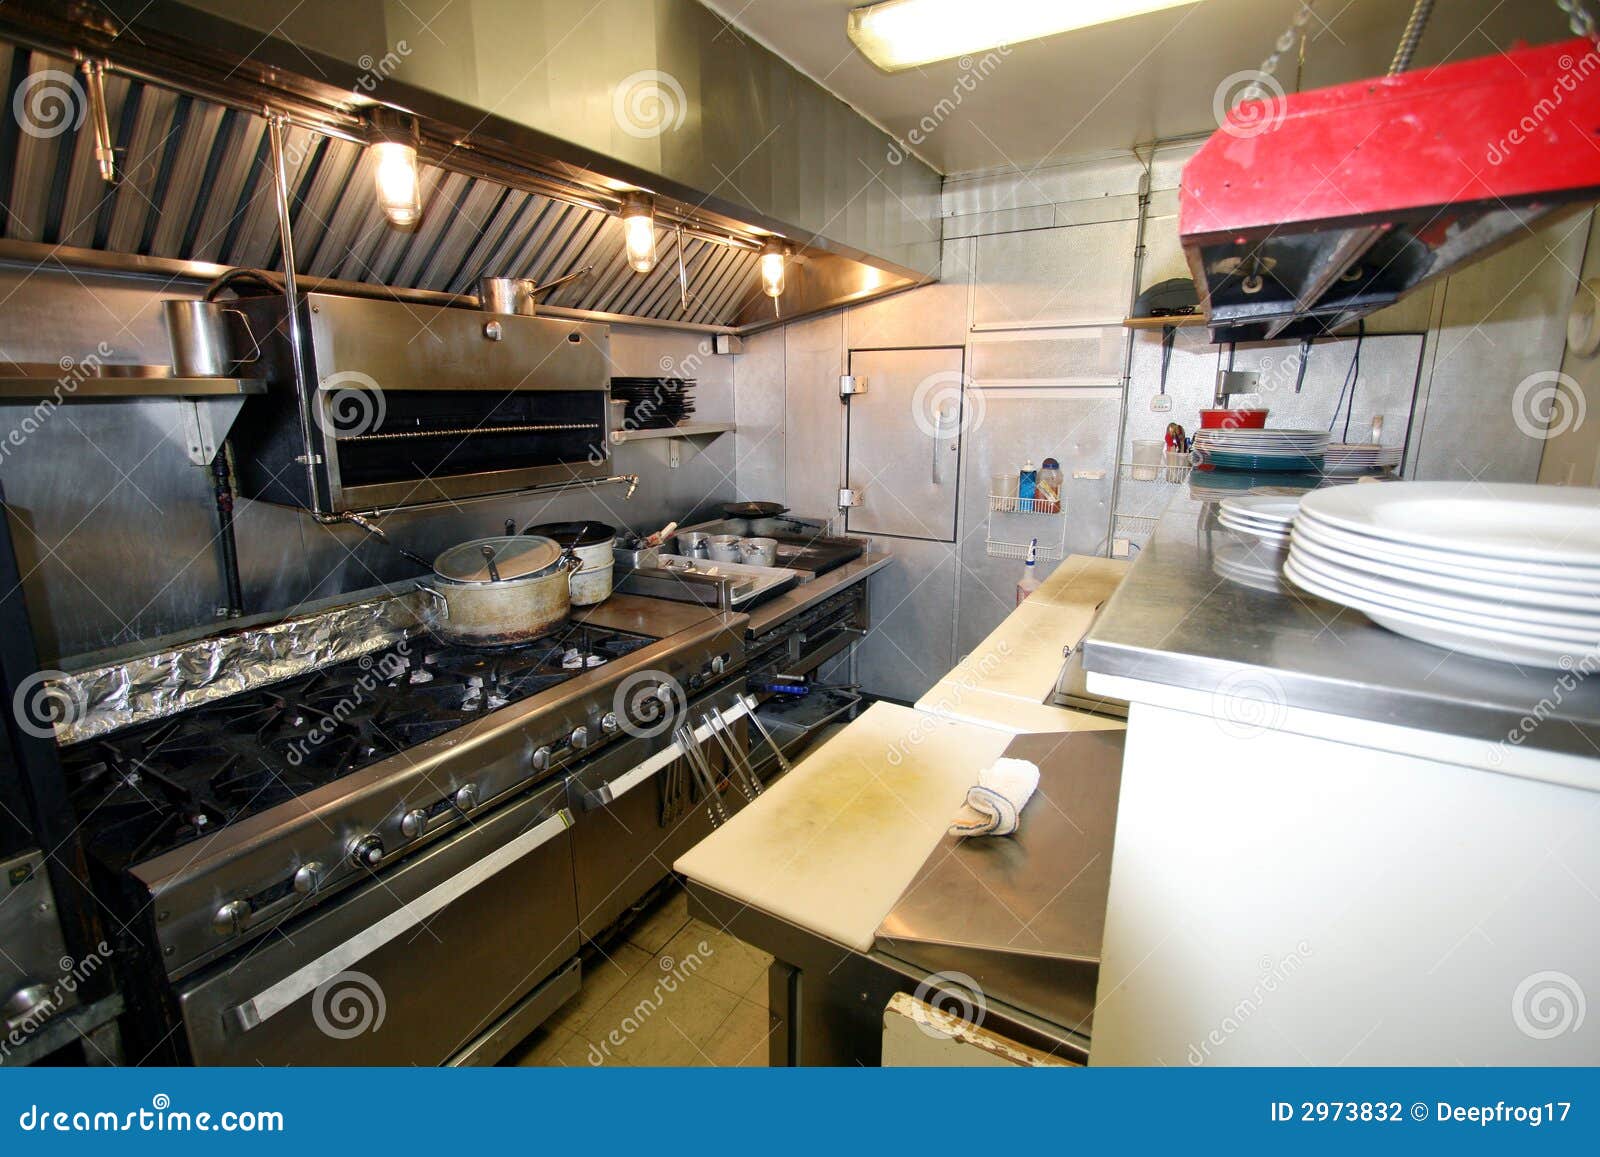 Small Kitchen In A Restaurant Stock Photography - Image: 2973832